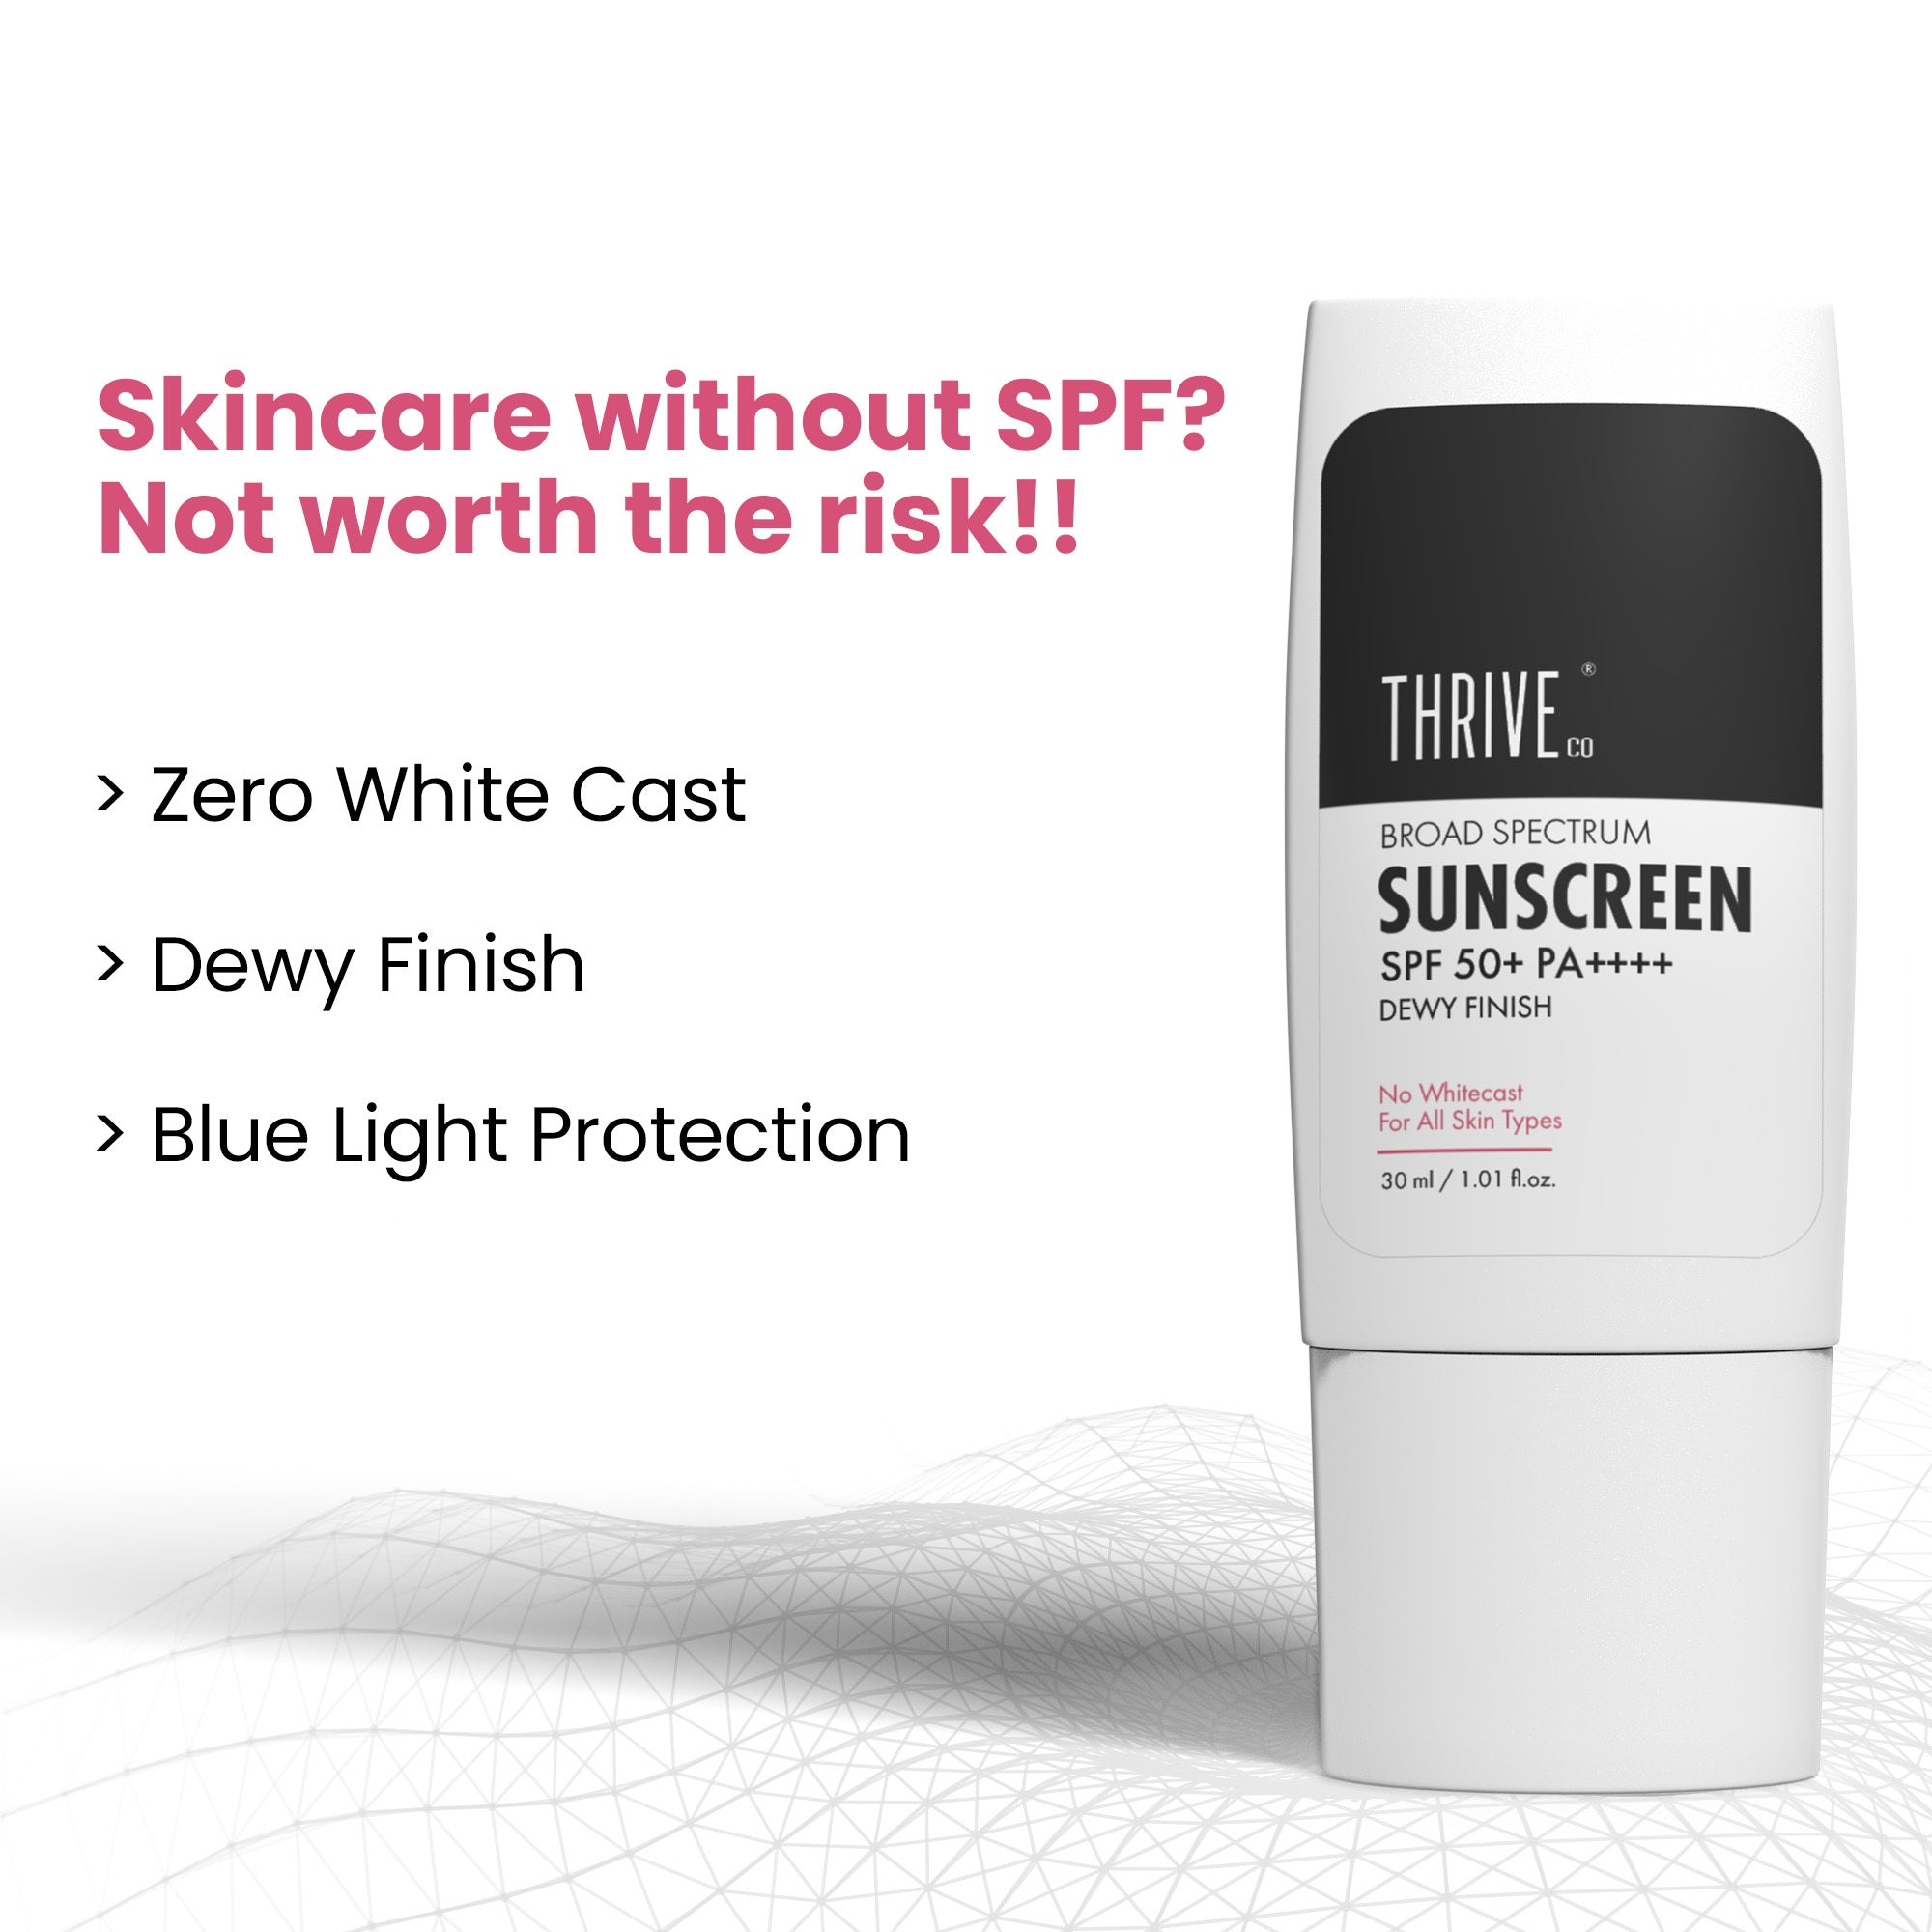 ThriveCo Broad Spectrum Sunscreen SPF 50+ PA++++, 30ml with UV Protection